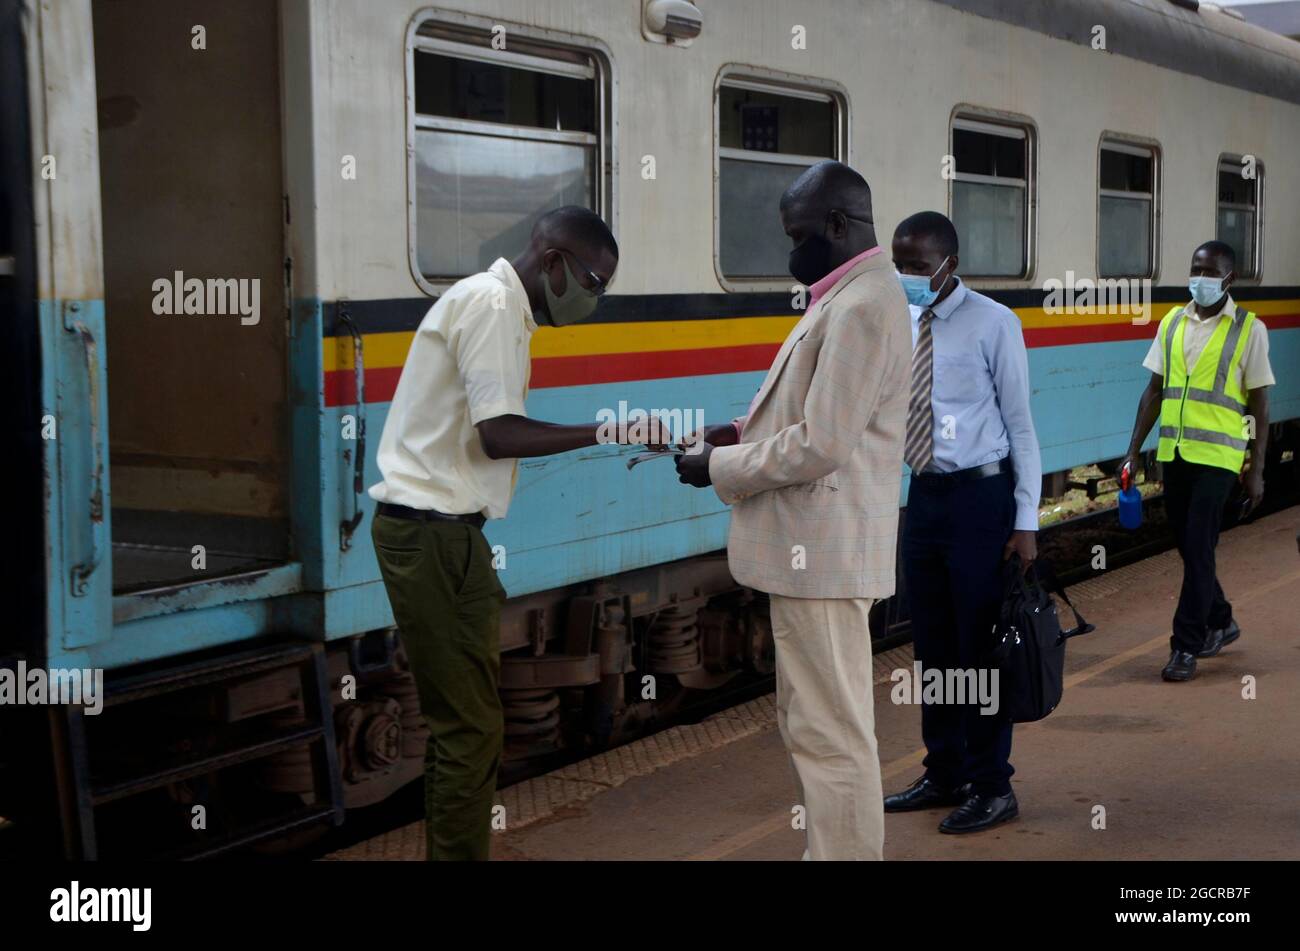 Kampala, Uganda. 9th Aug, 2021. Passengers get on a train in Kampala, Uganda, Aug. 9, 2021. Passenger train services in Uganda's capital Kampala have resumed after the country lifted a 42-day lockdown on July 30 following a reduction in the COVID-19 infection rate. Credit: Nicholas Kajoba/Xinhua/Alamy Live News Stock Photo